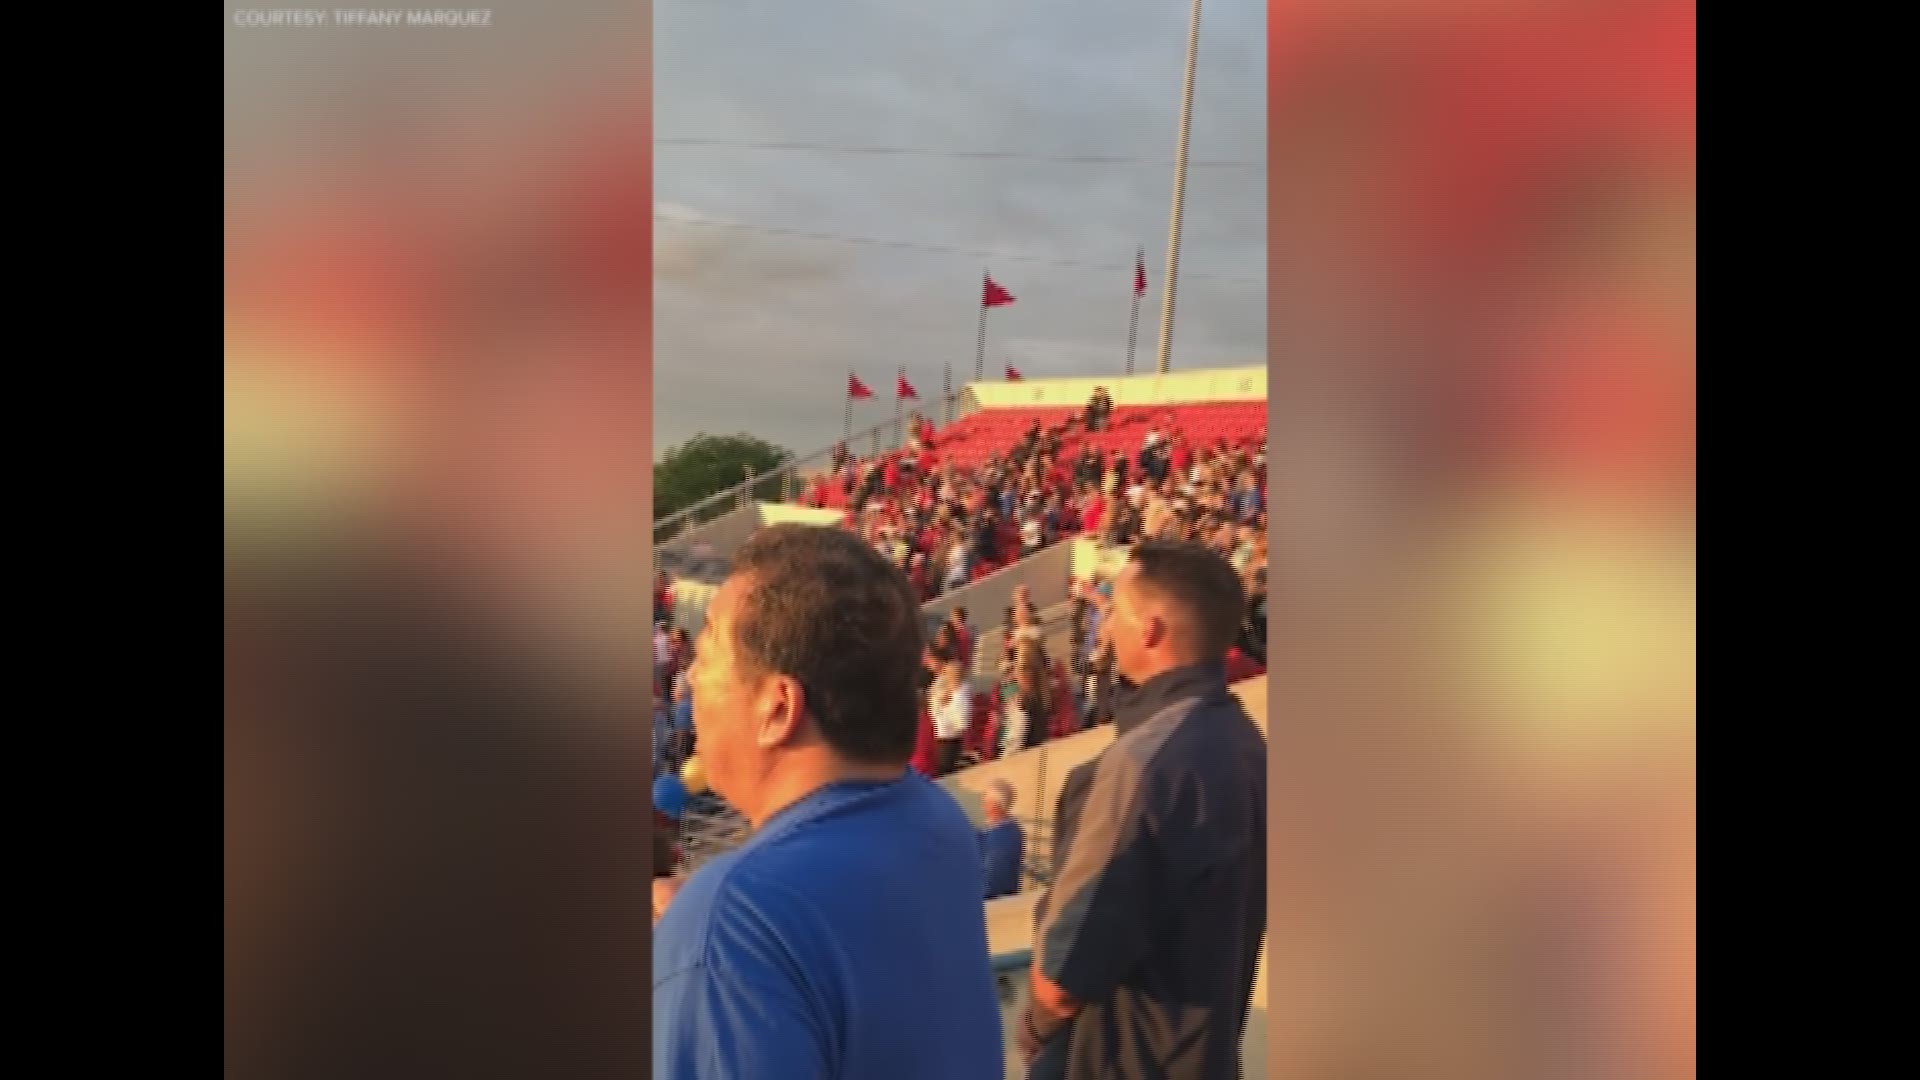 When the announcer of a softball game took to the mic to say the national anthem would not be played, the crowd took tradition into their own hands.